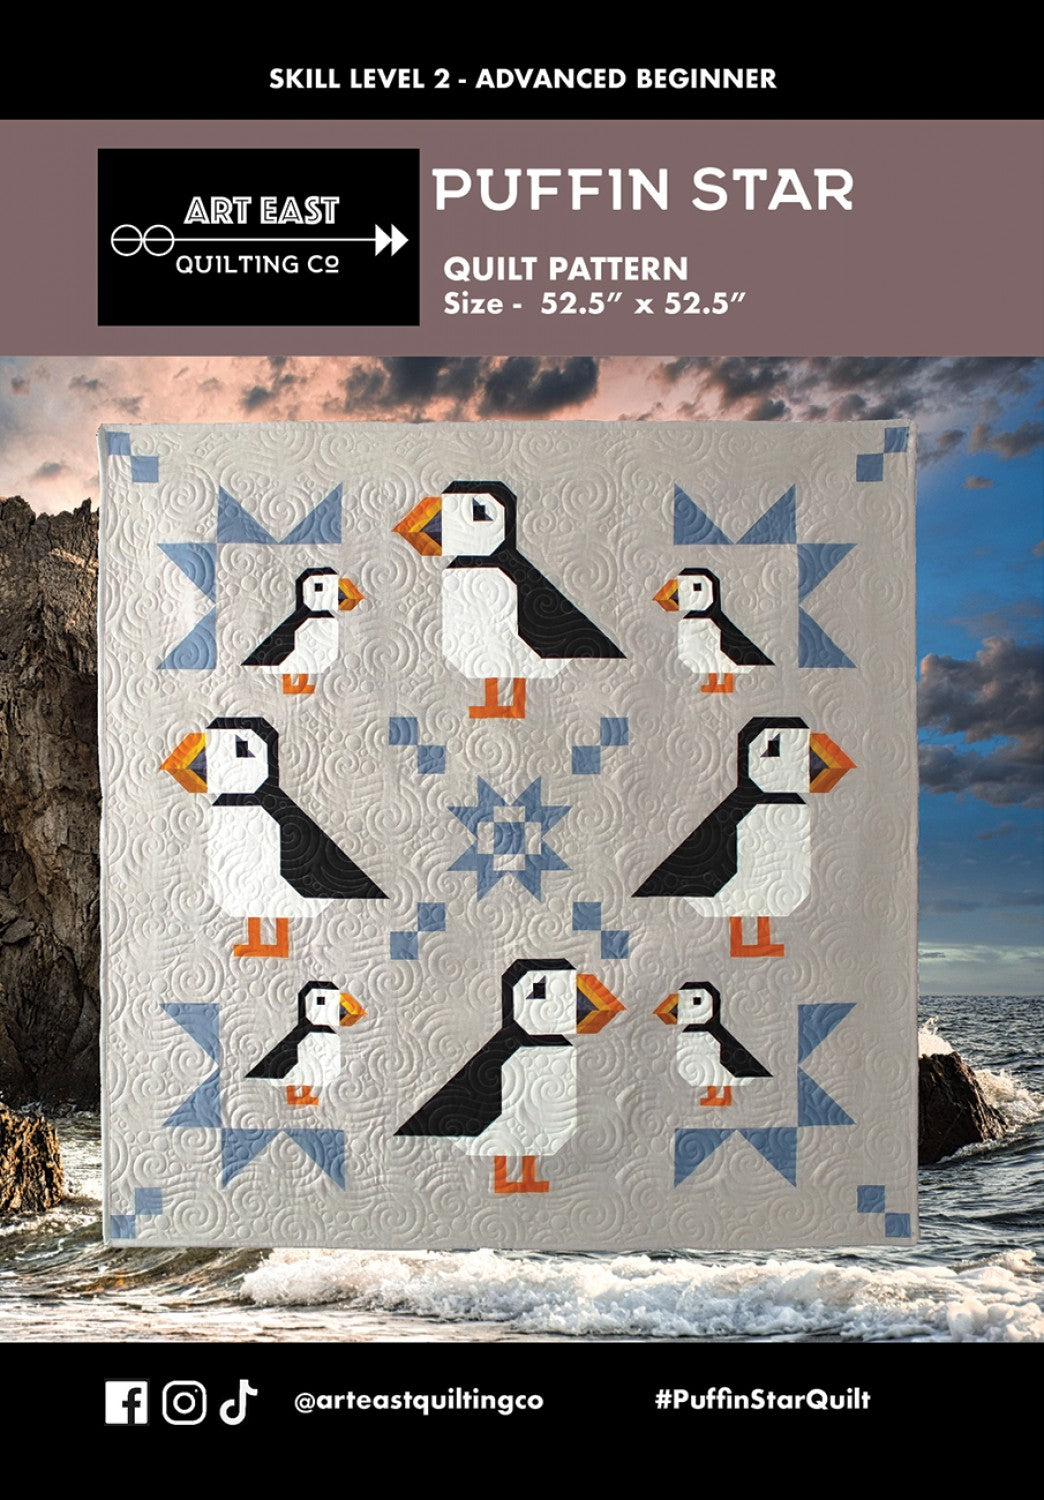 Puffin Star Quilt Pattern from Art East Quilting Co. - AEPS0323